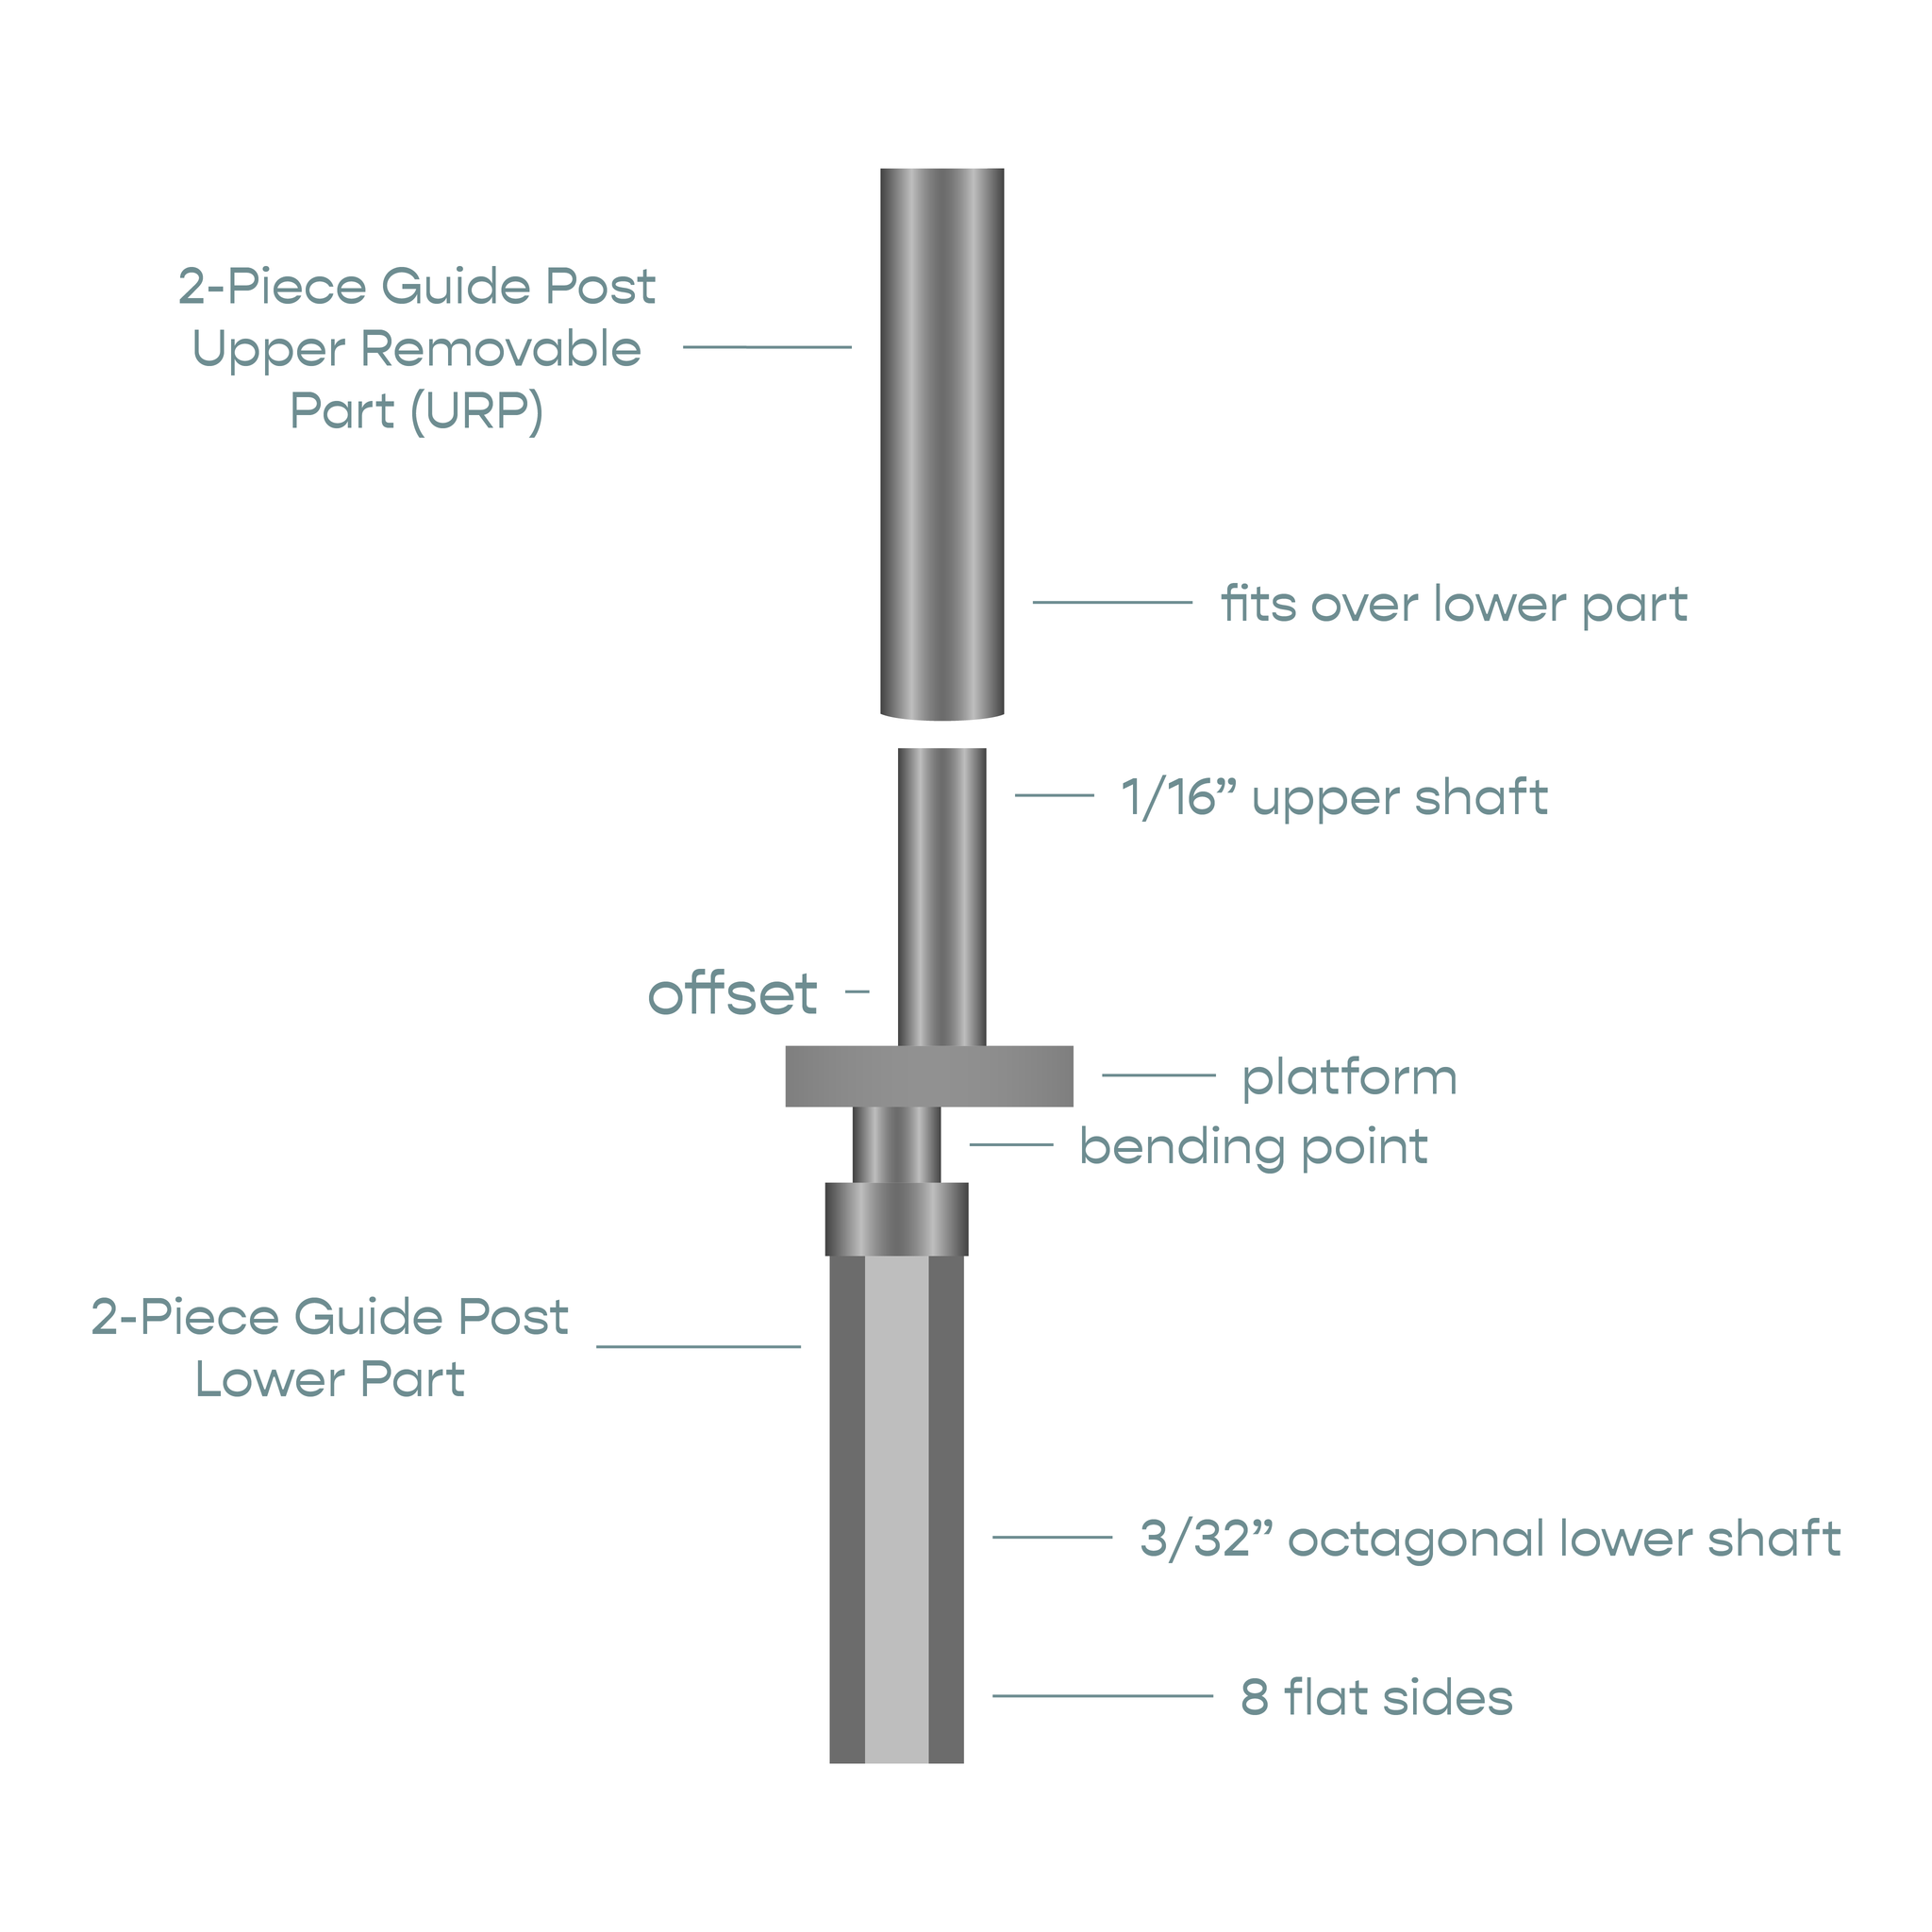 2-Piece Guide Post - 1.0 mm Offset Lower Part